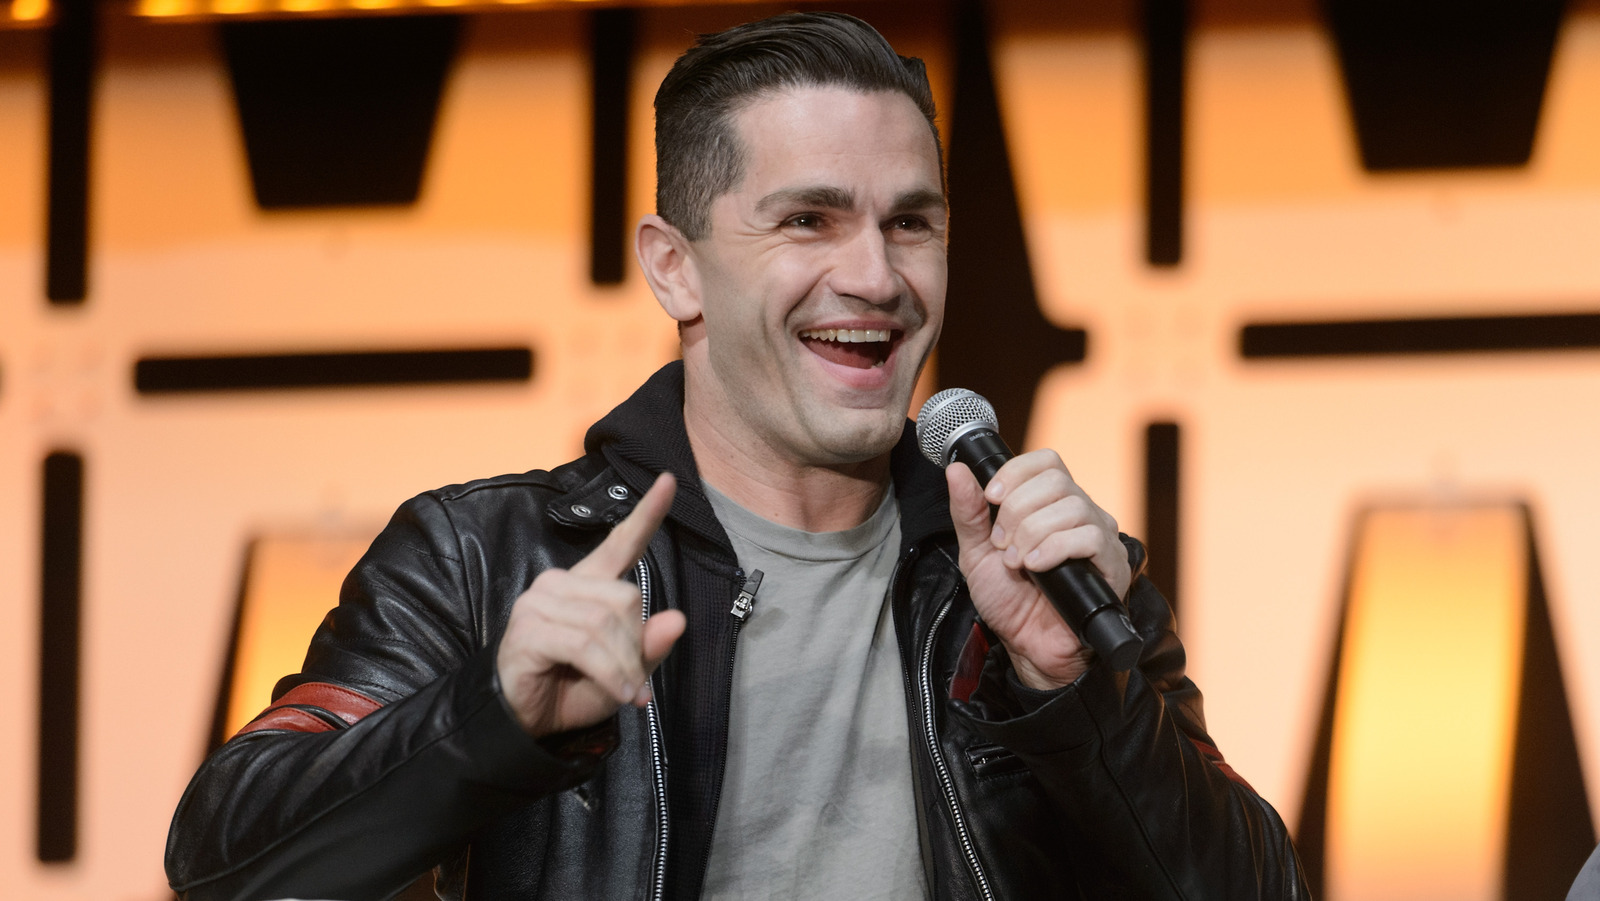 Sam Witwer Landed His First Of Many Star Wars Roles By Being A Franchise Superfan